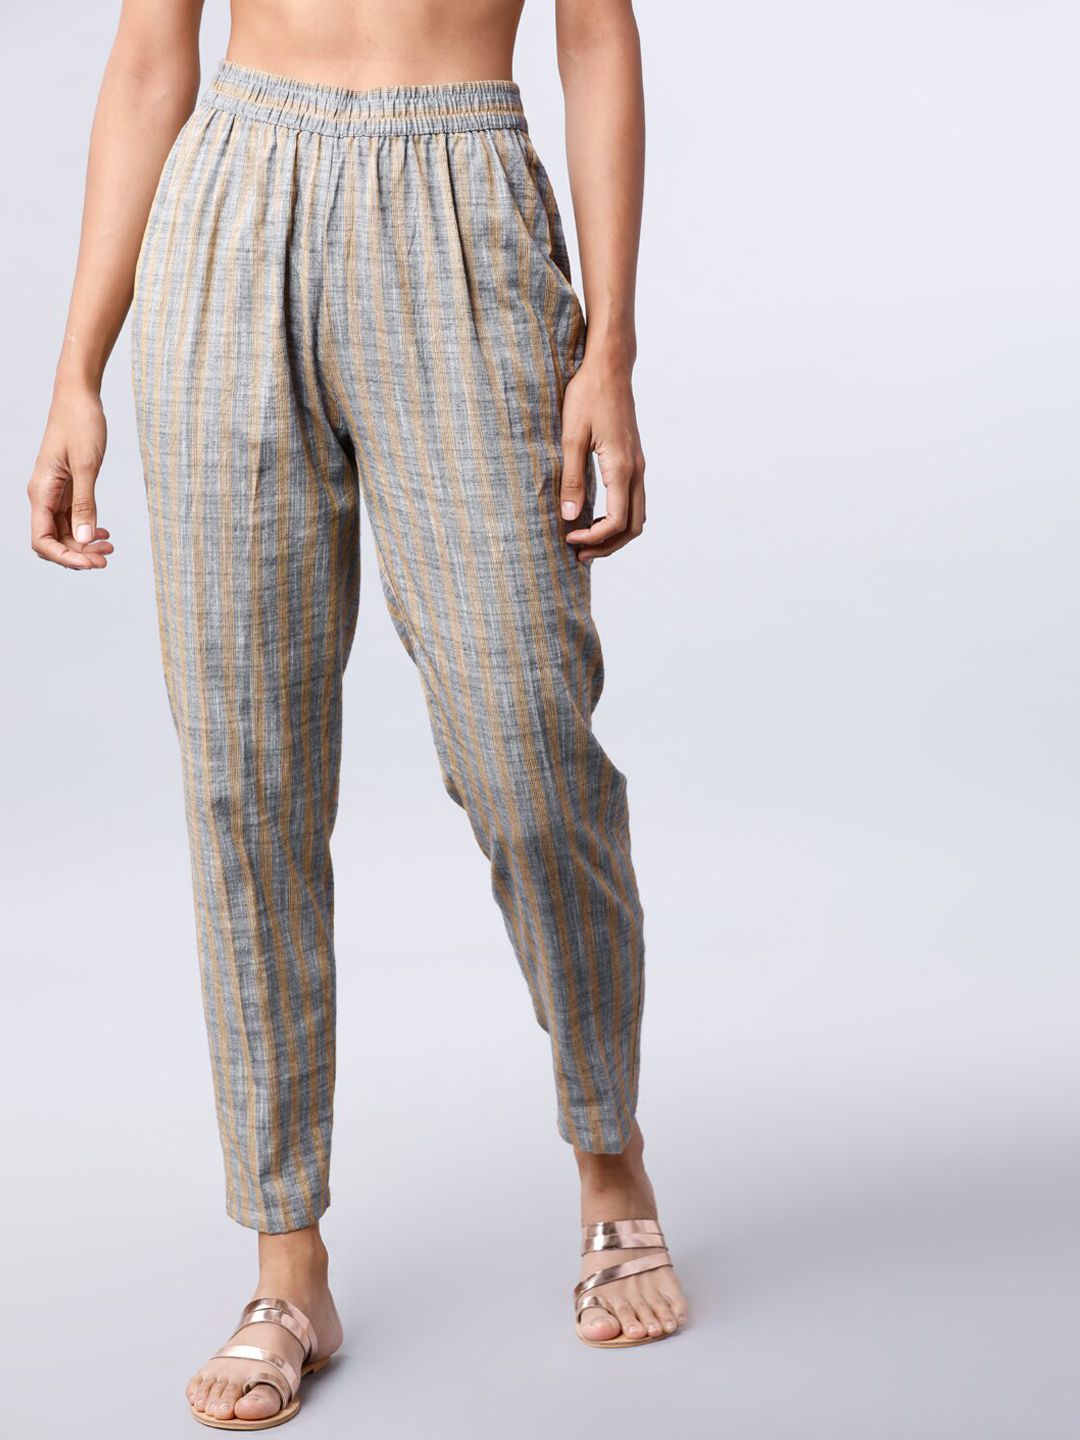 Vishudh Women Grey & Mustard Yellow Tapered Fit Striped Regular Trousers Price in India